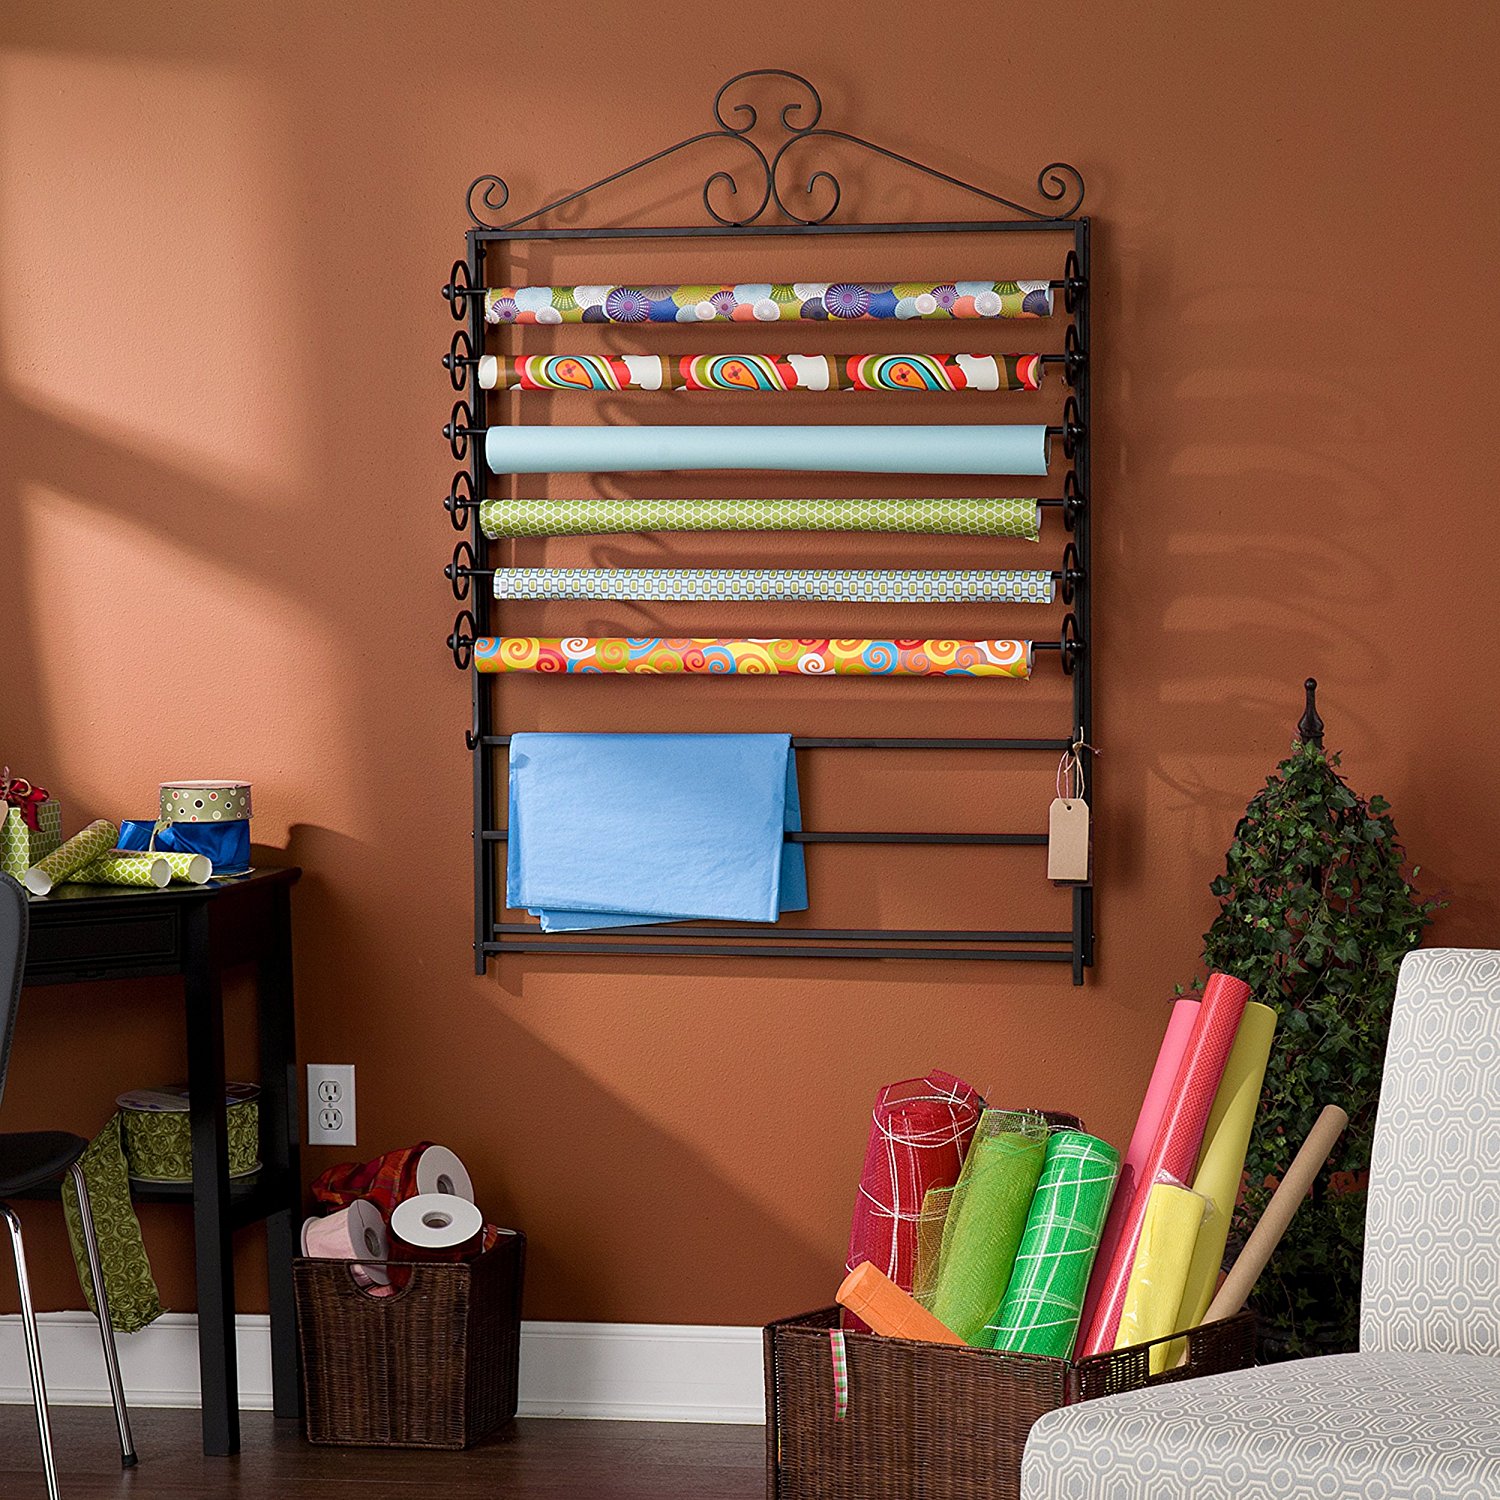 Wrapping paper organizer that hangs on the wall.  Smart idea